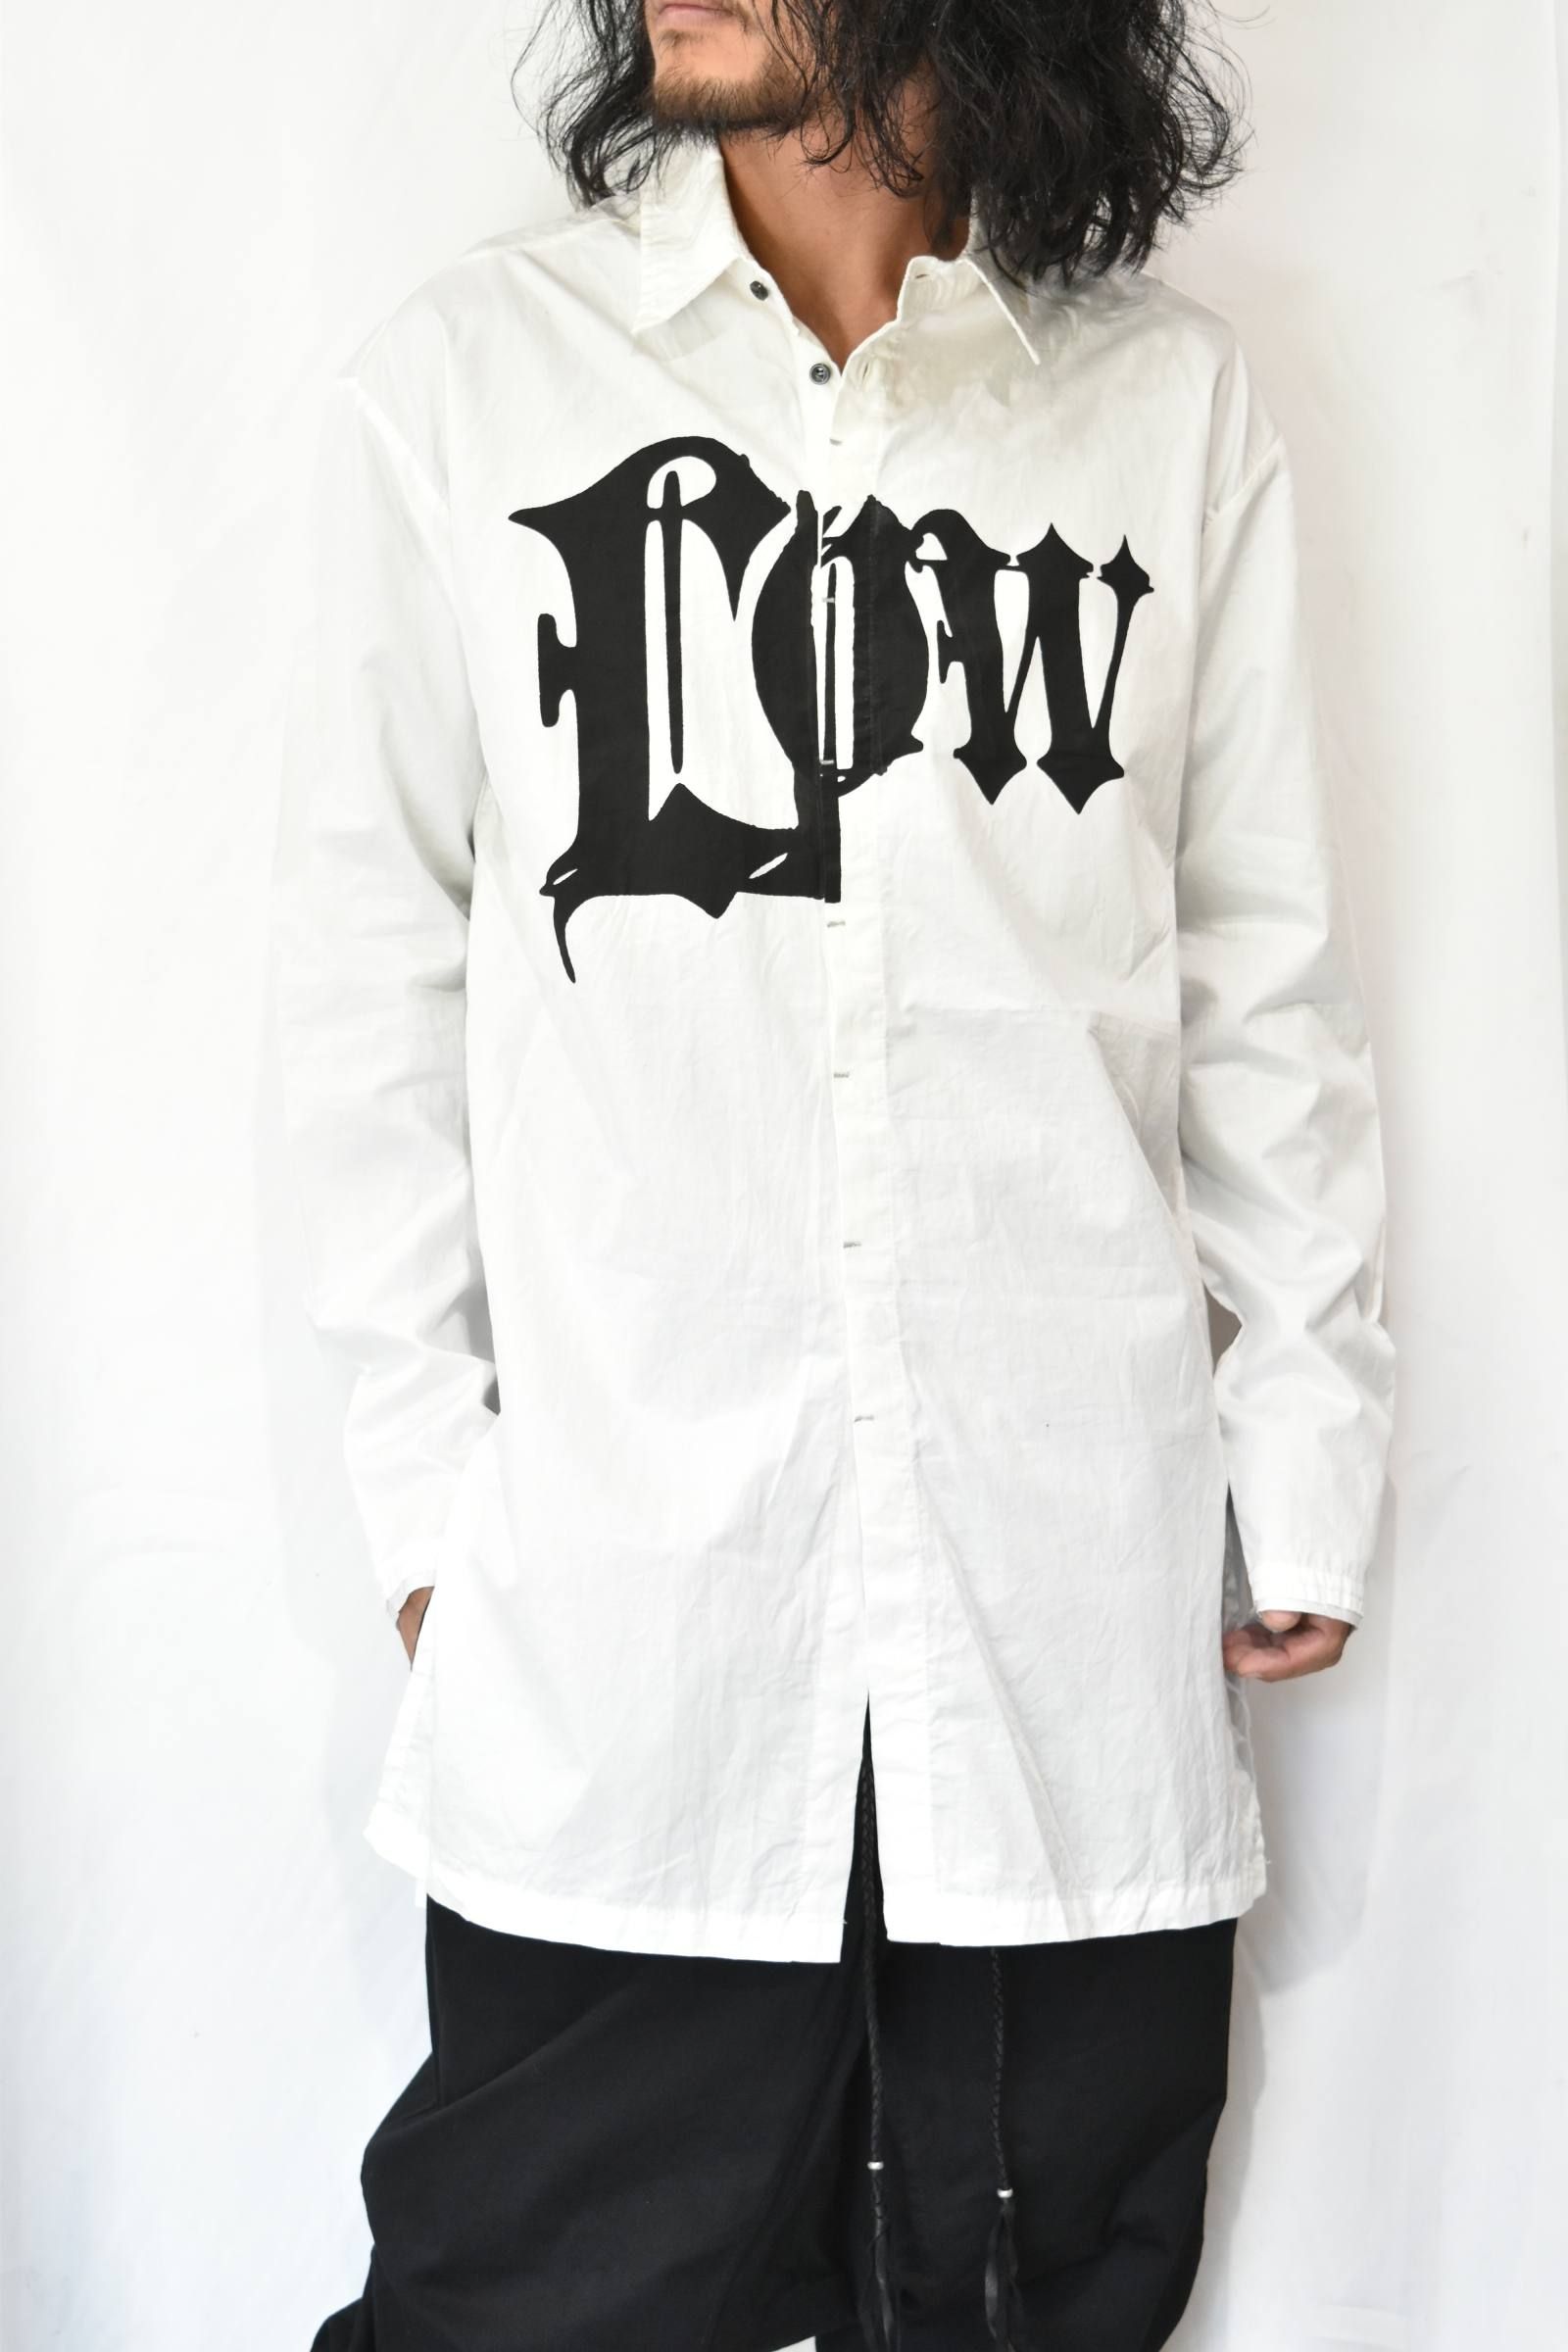 KMRii - Low_shirt | chord online store